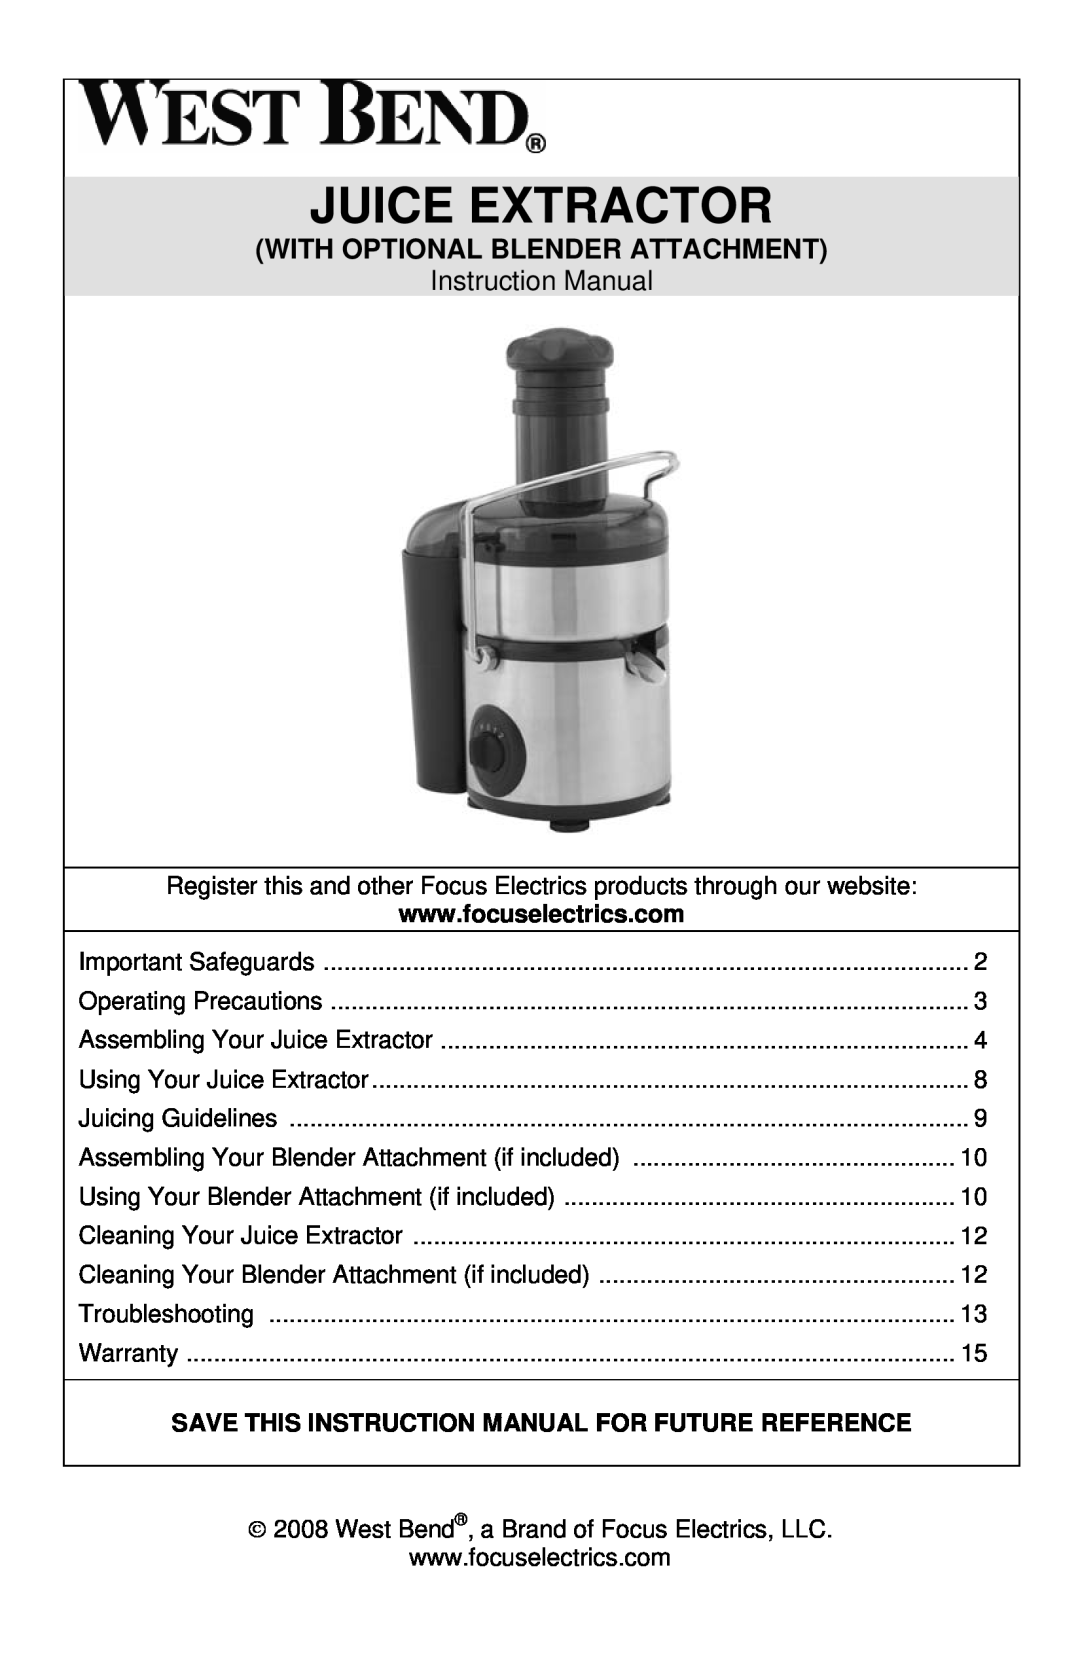 West Bend 7000, L5711A instruction manual Juice Extractor, With Optional Blender Attachment 